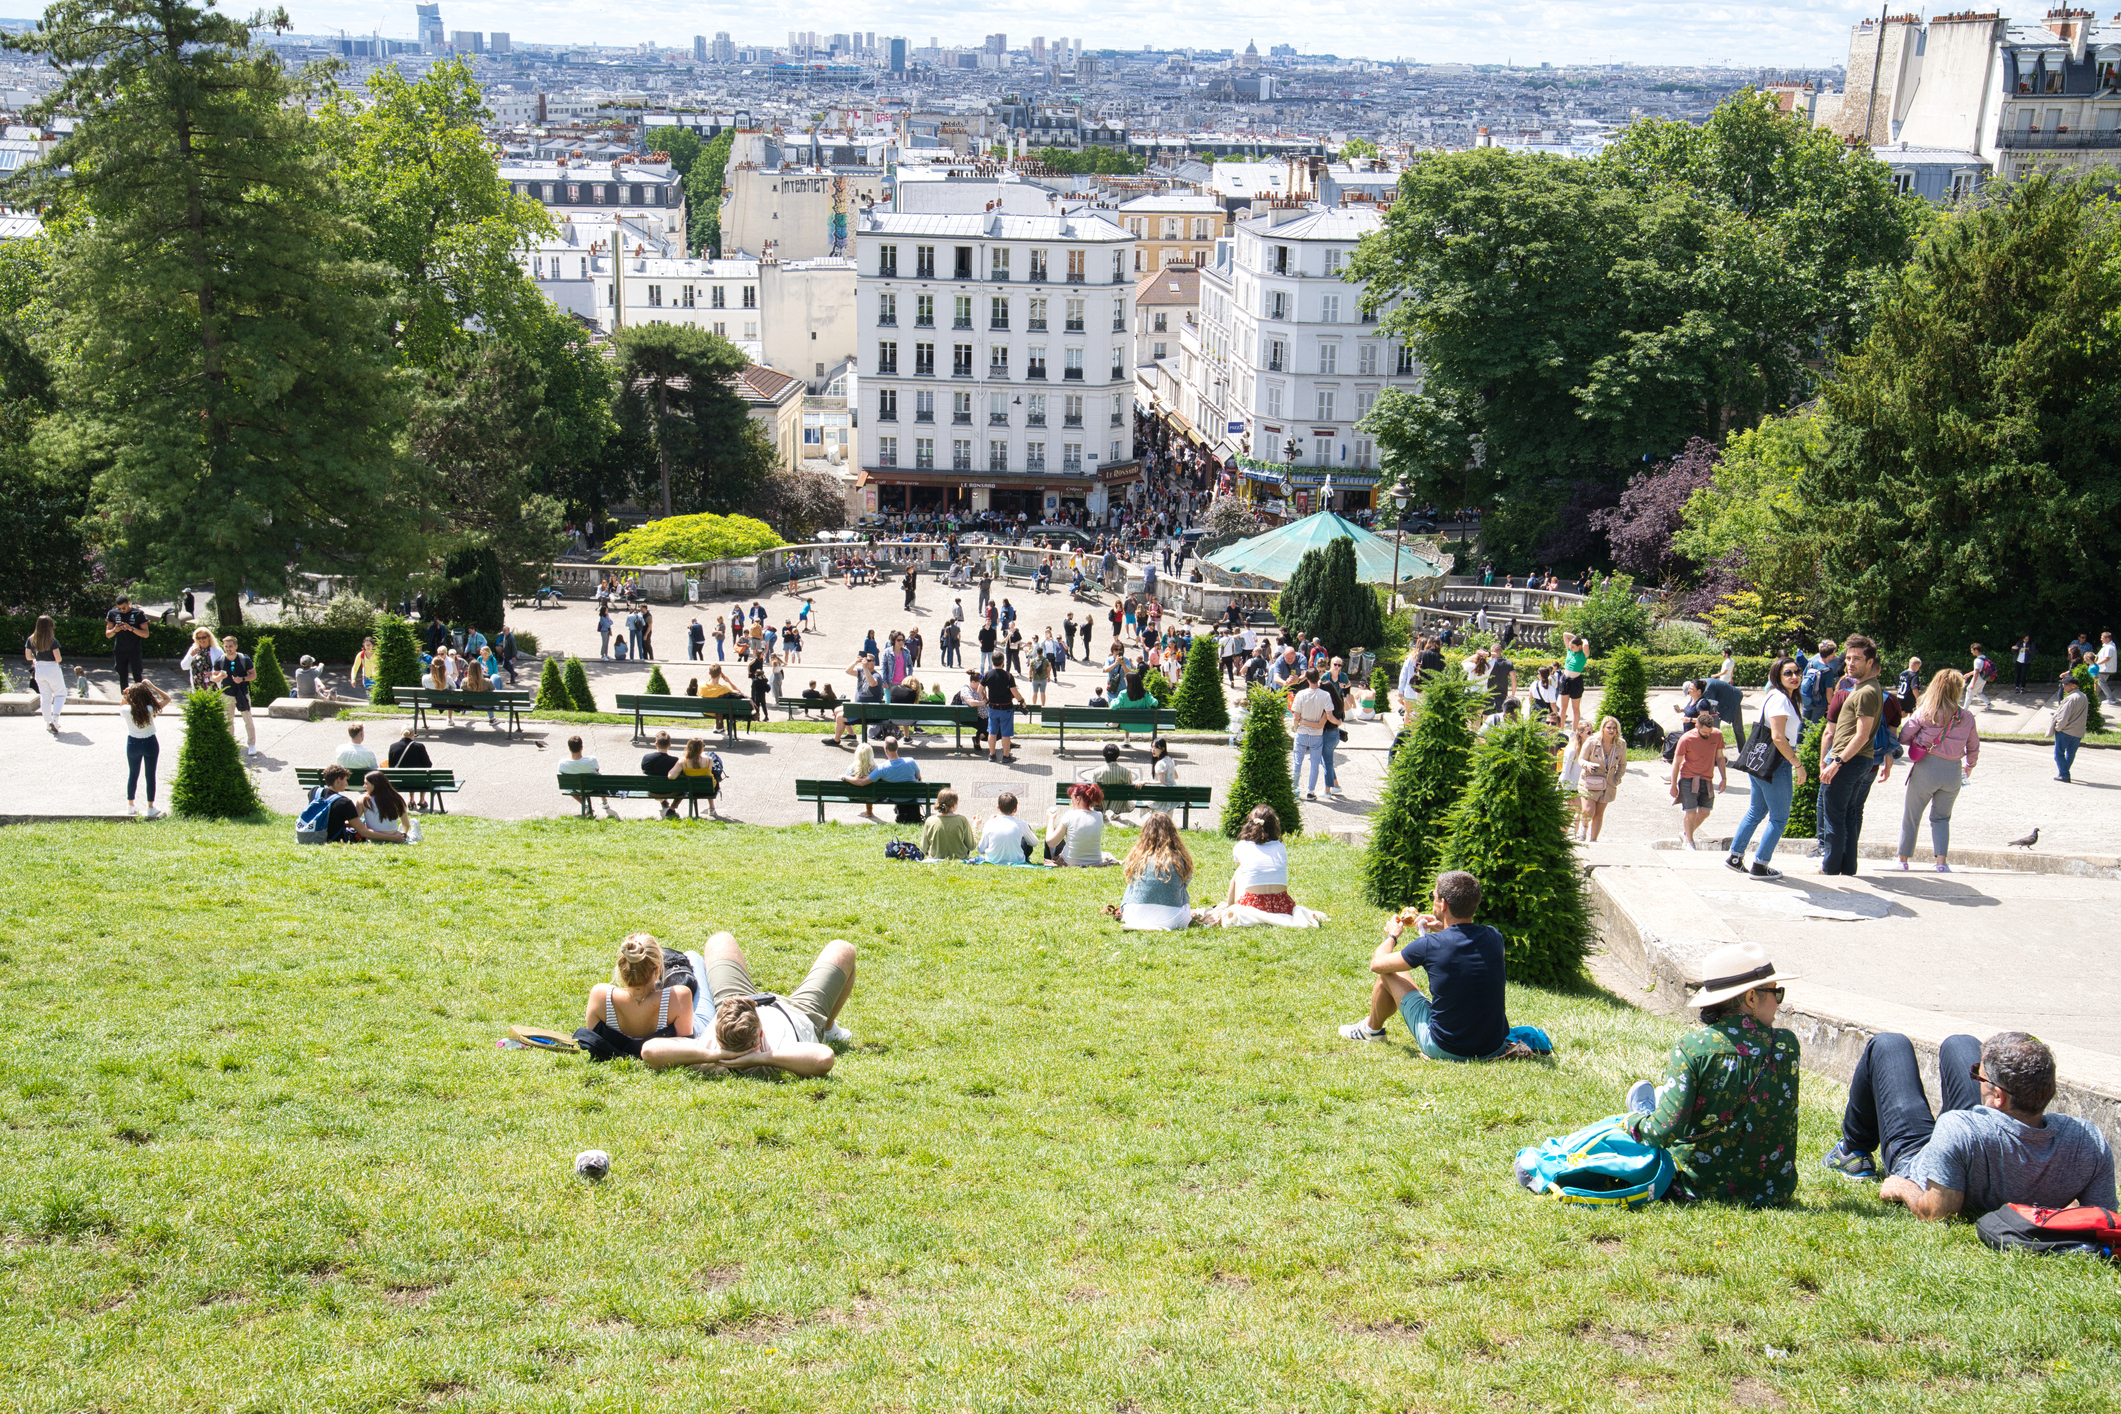 People relaxing and walking in a busy park with benches and a central staircase on a sunny day